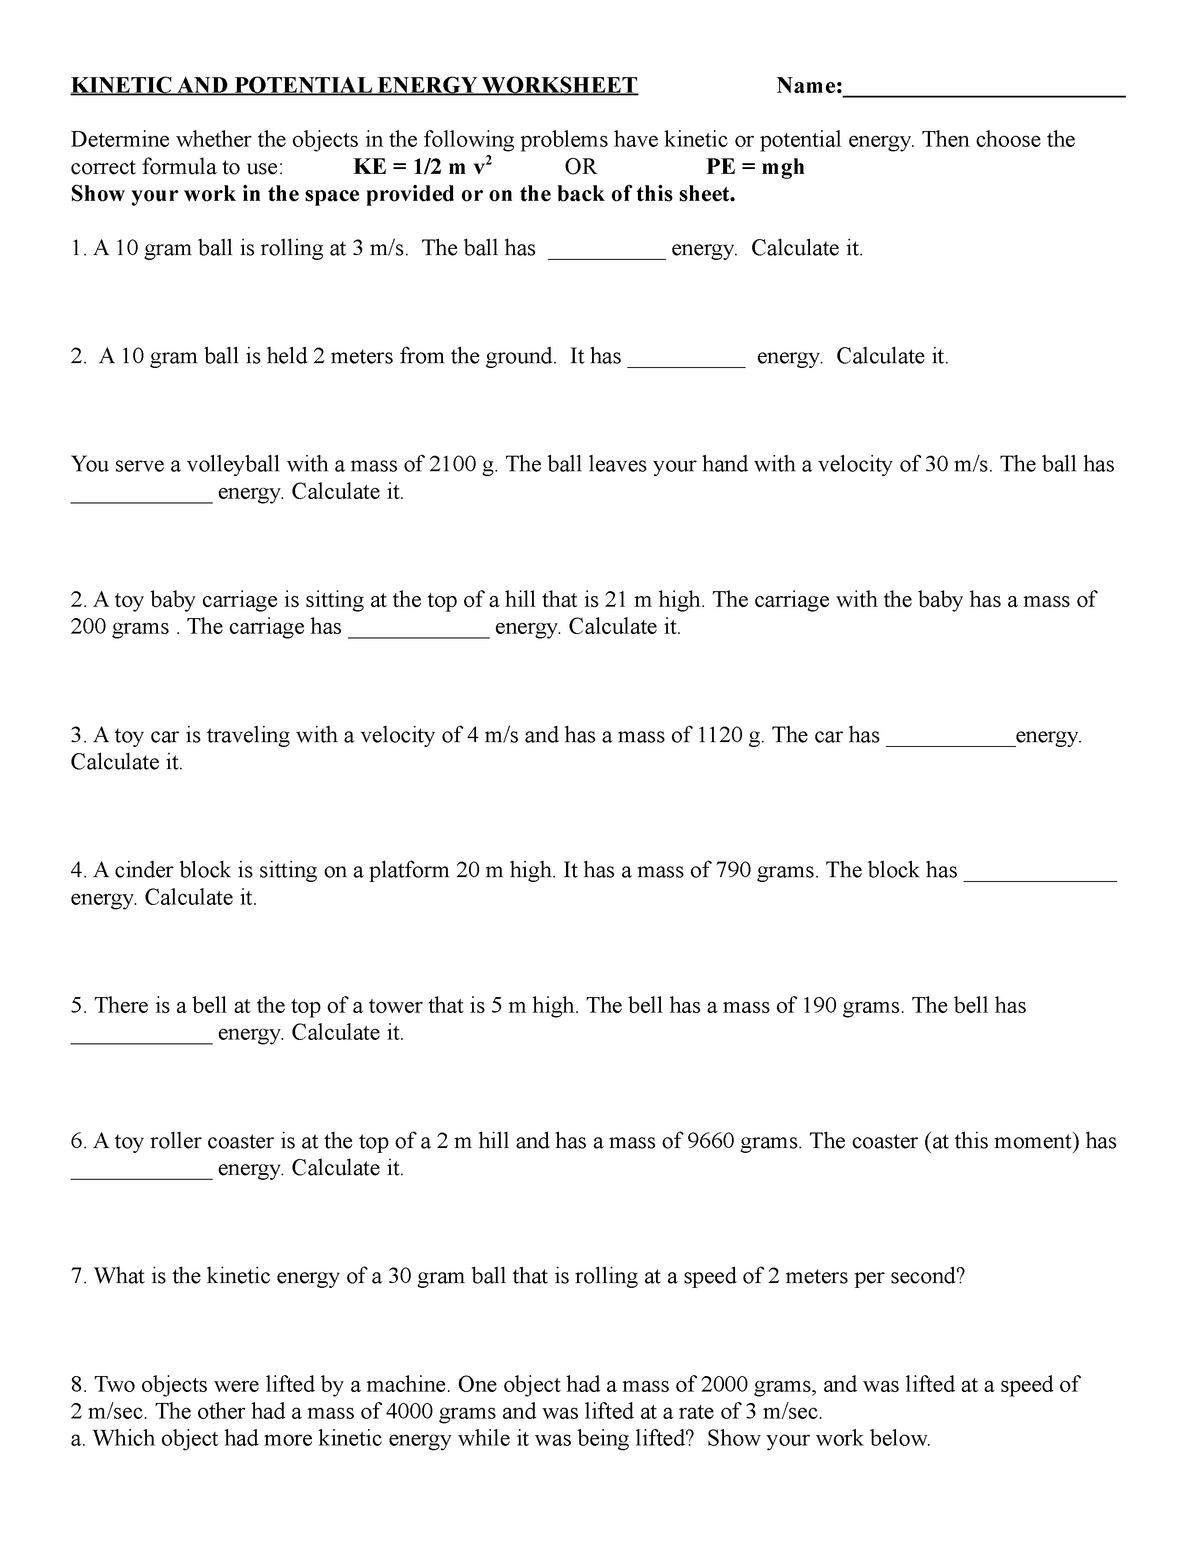 Calculating kinetic and potential energy - KINETIC AND POTENTIAL For Introduction To Energy Worksheet Answers